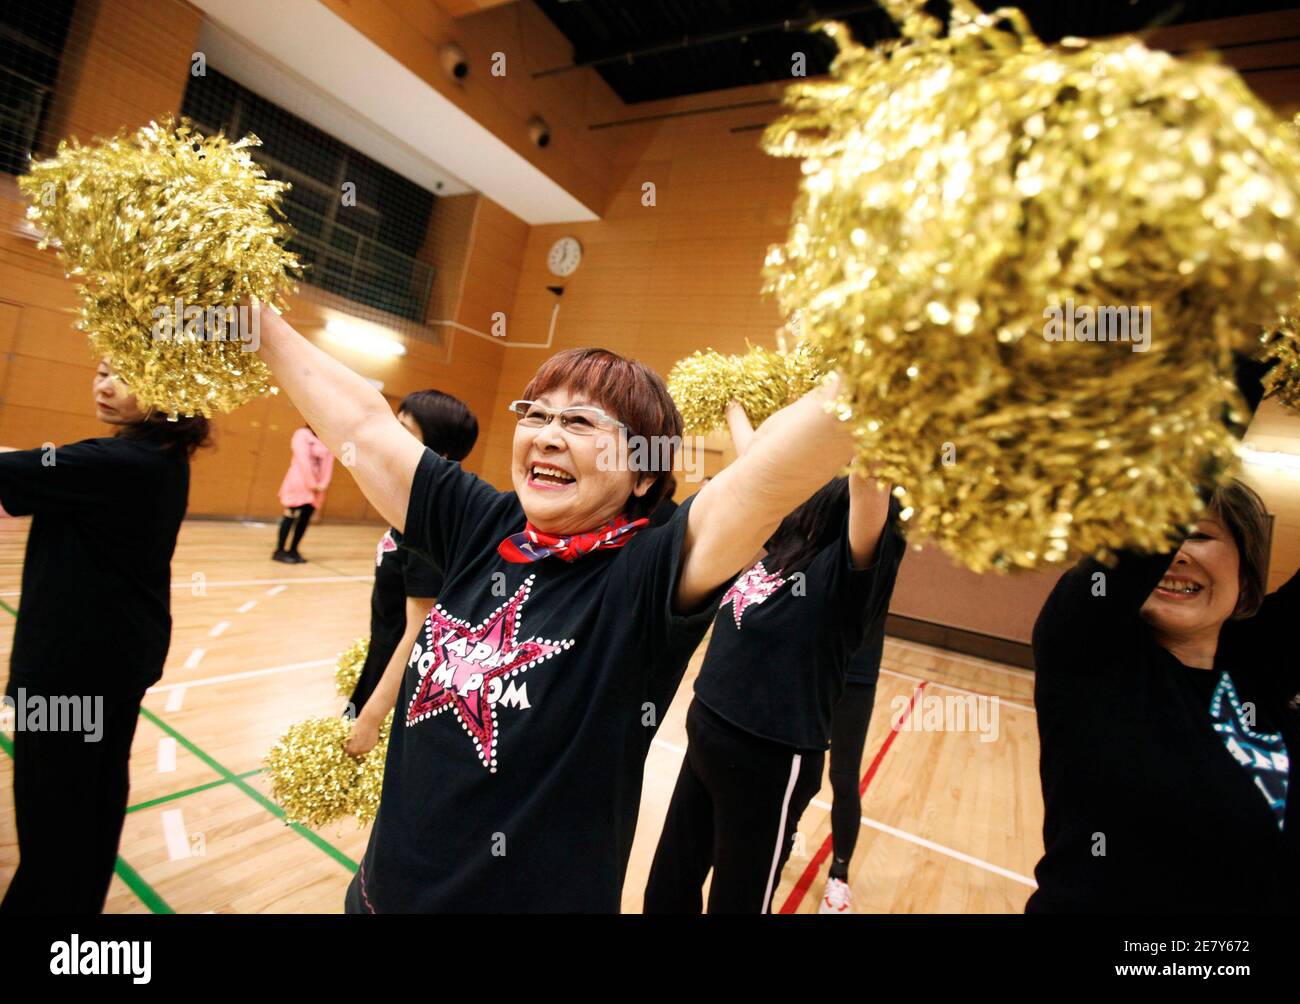 Tæmme efter det nationalisme Fumie Takino, a 78-year-old cheerleader, practices cheerleading with other  members of a seniors' cheerleading group called "Japan Pom Pom" in Tokyo  March 24, 2010. Japan may have little to celebrate with its